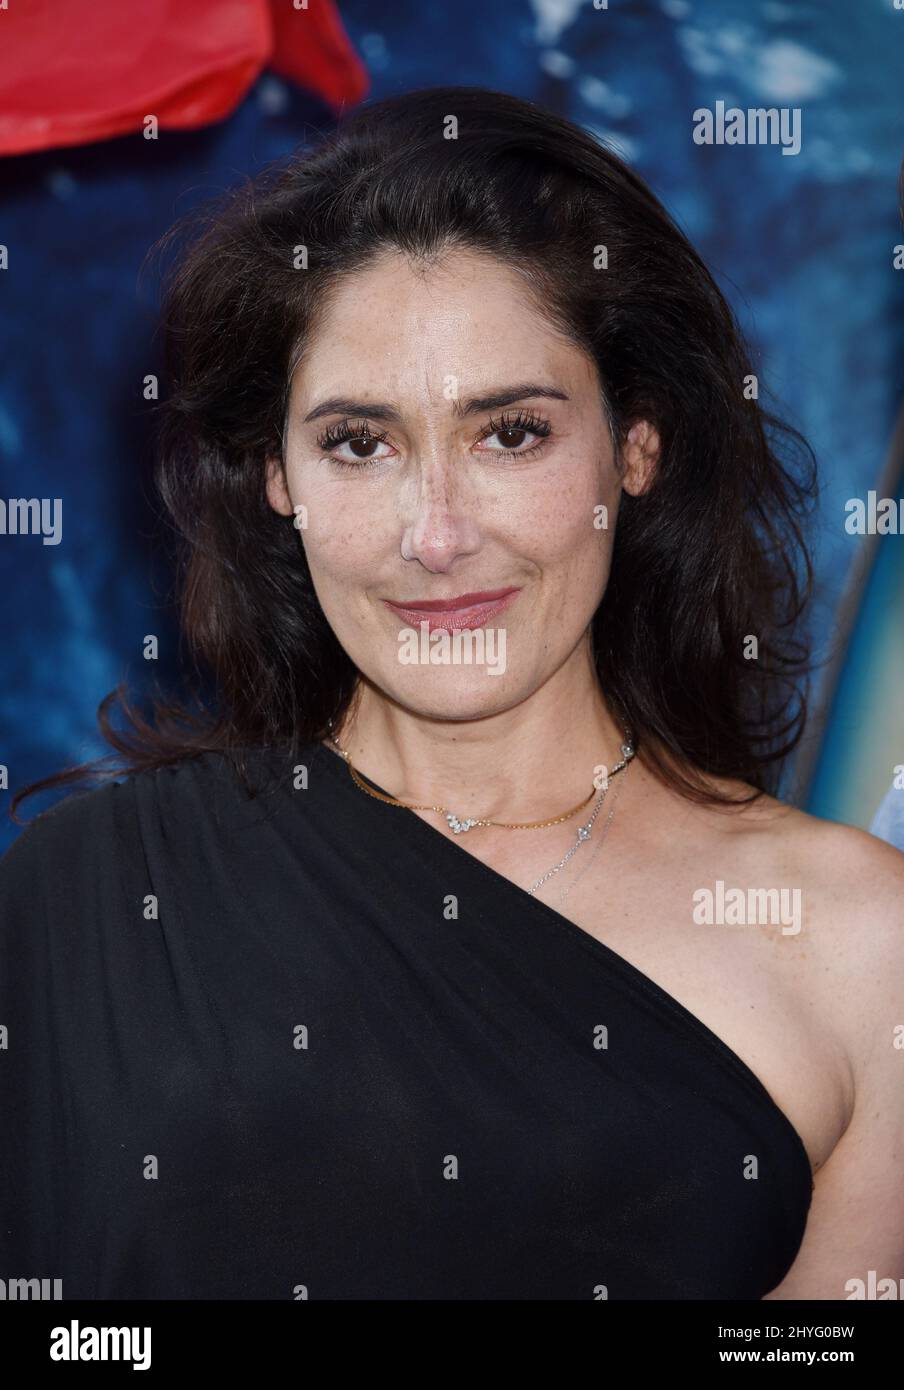 Alicia Coppola at Warner Bros. 'THE MEG' U.S. Premiere held at the TCL Chinese Theatre on August 6, 2018 in Hollywood Stock Photo